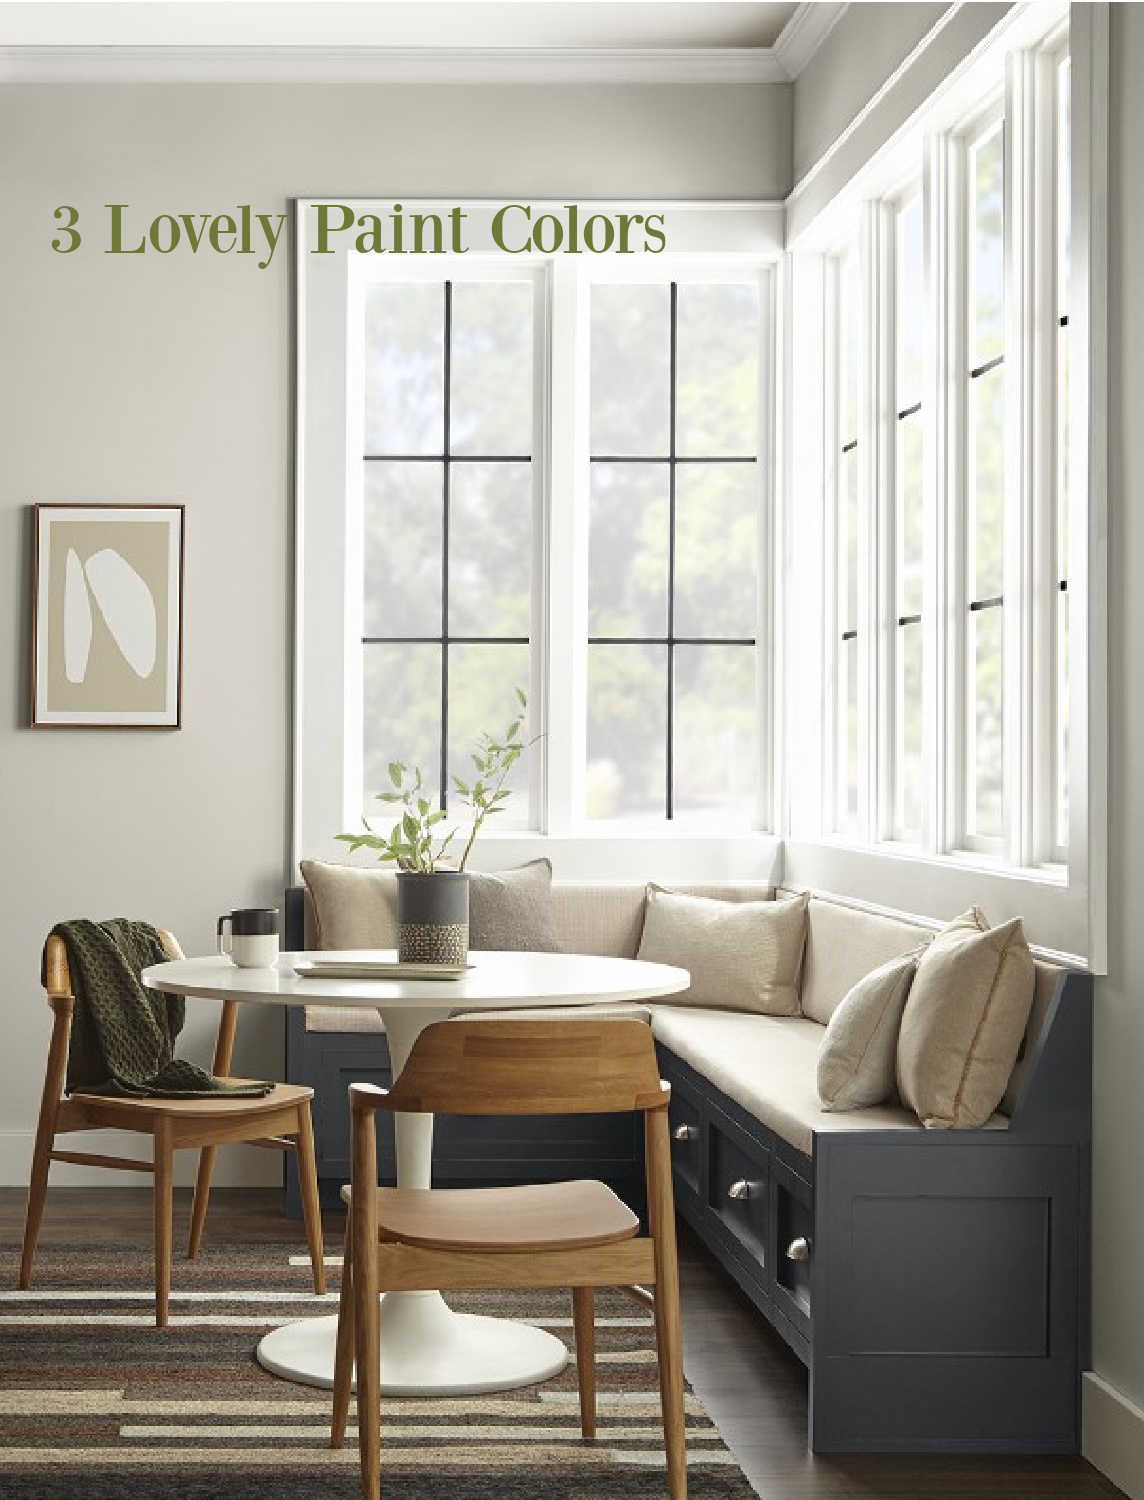 3 Lovely Paint Colors - Behr neutrals in a dining room. #behrdesignercollection #neutraldiningroom